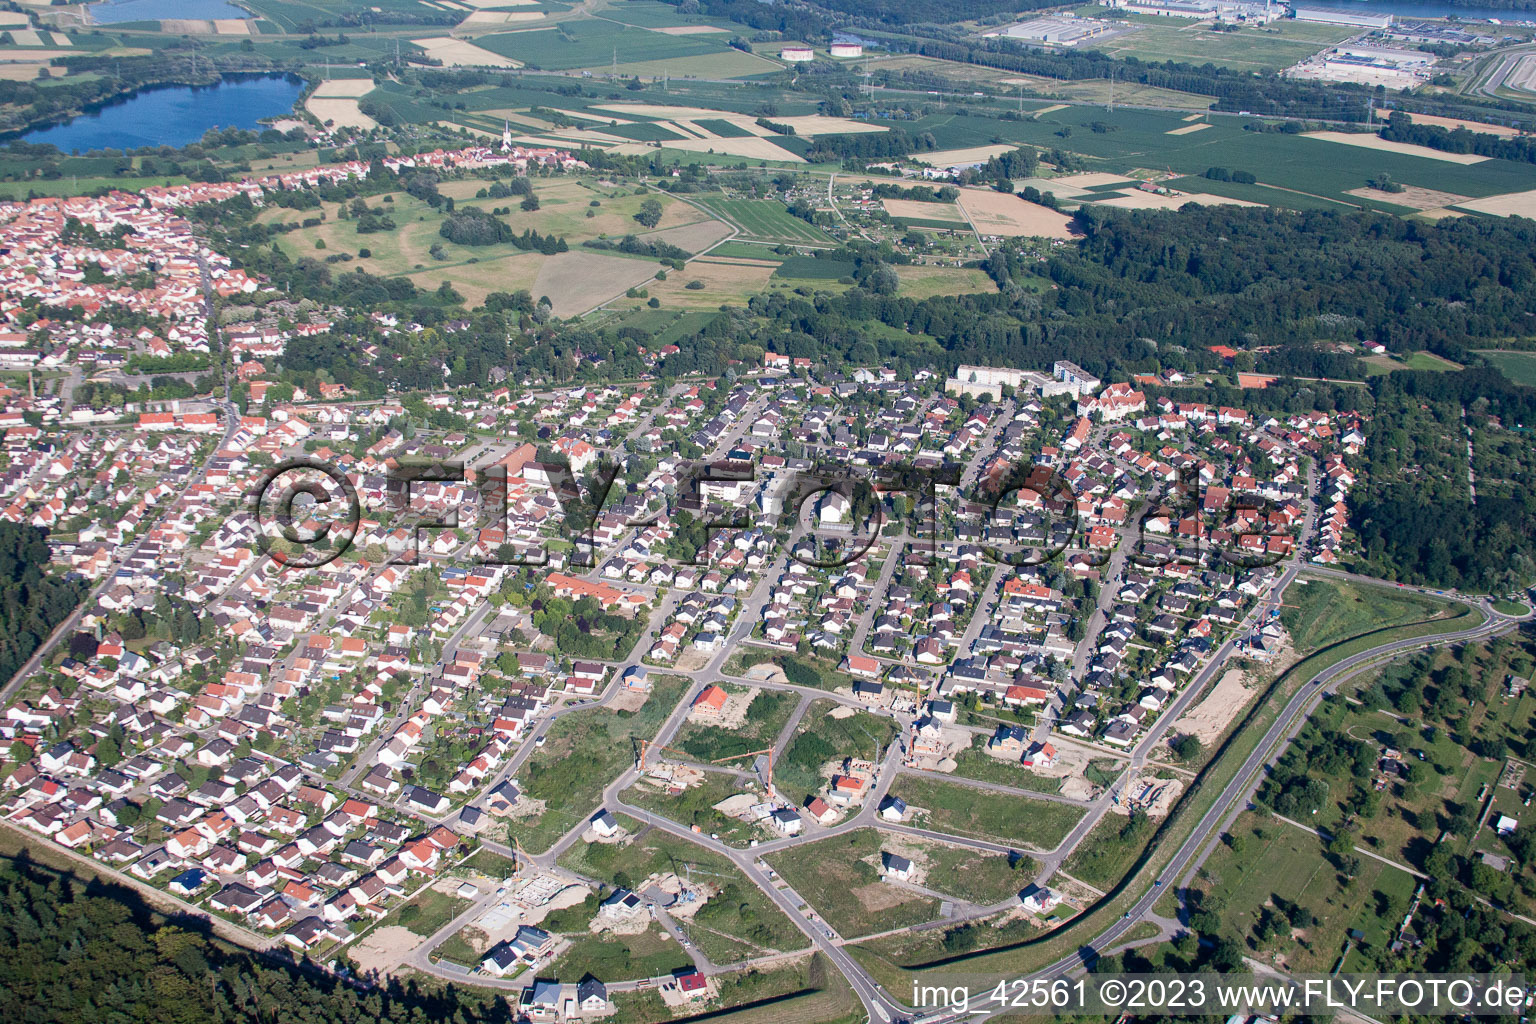 New development area west in Jockgrim in the state Rhineland-Palatinate, Germany seen from a drone